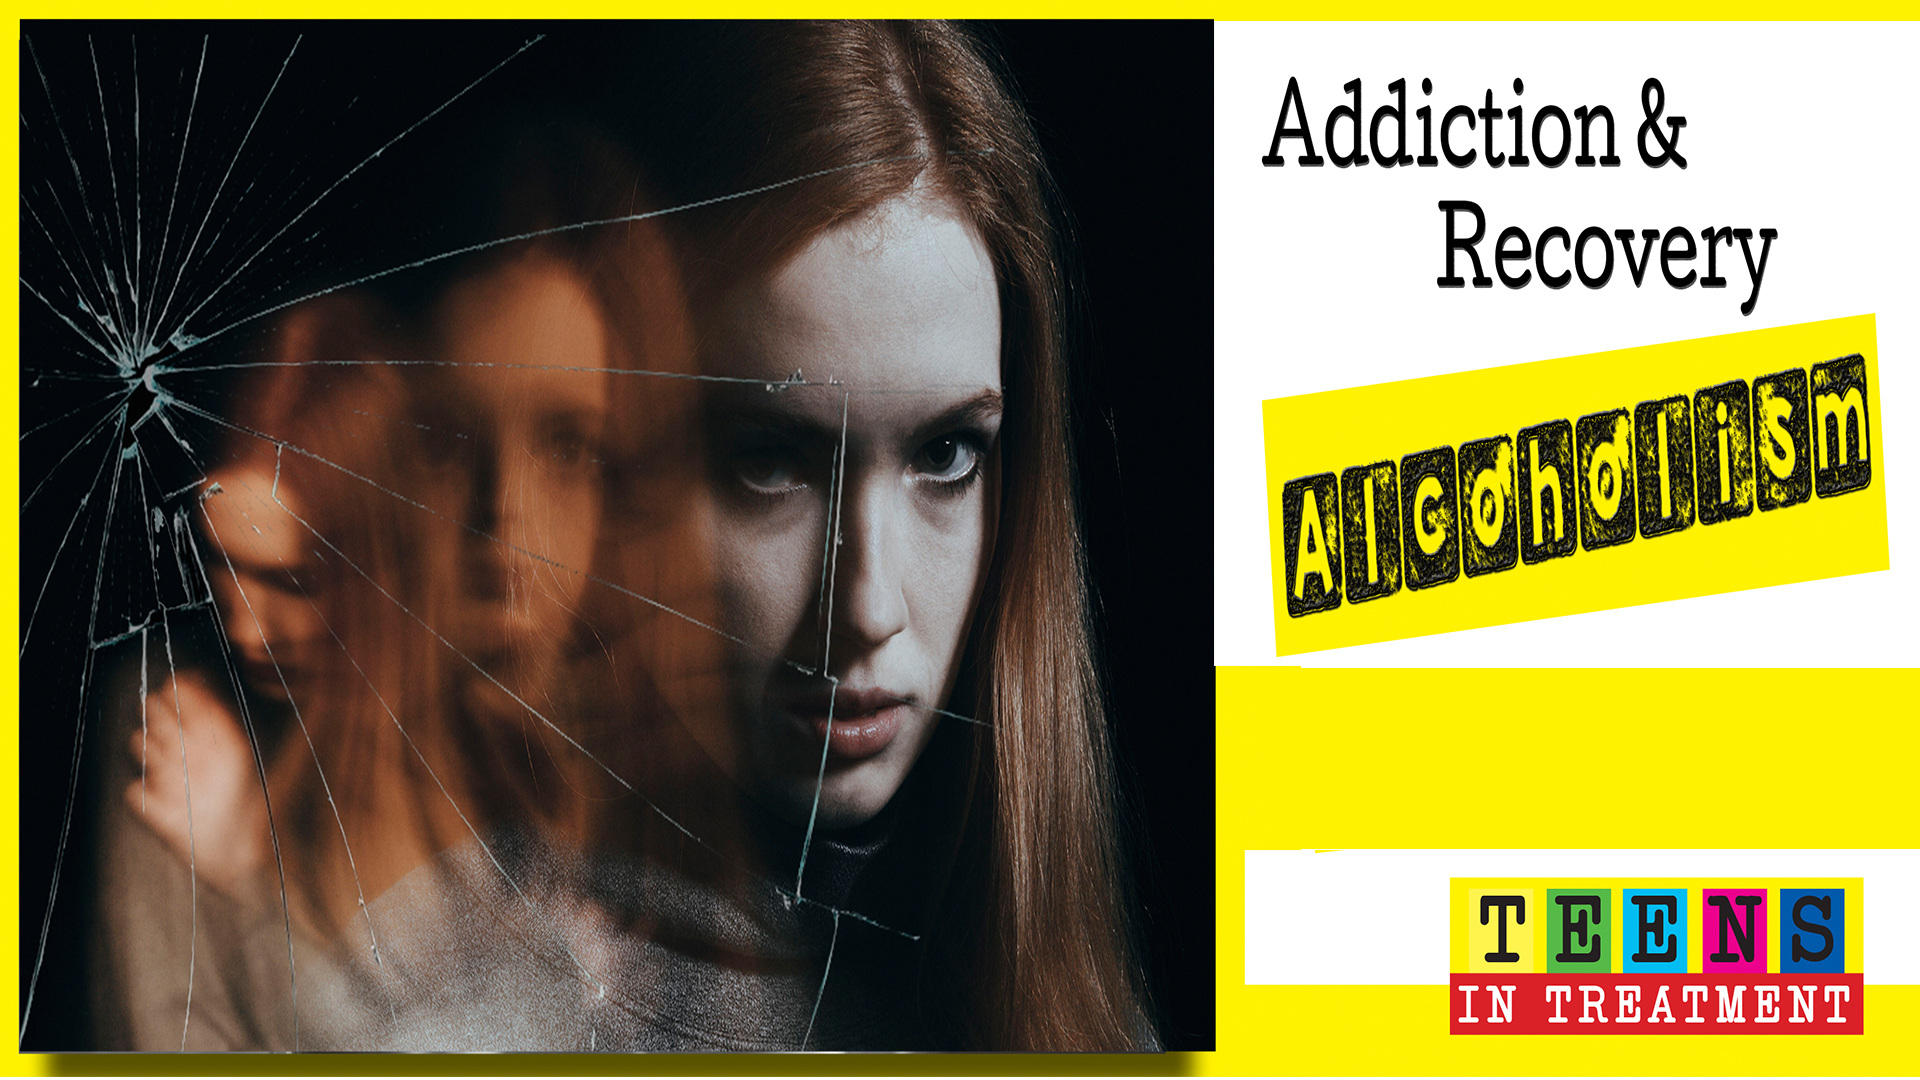 Q517 - Alcohol Addiction & Recovery